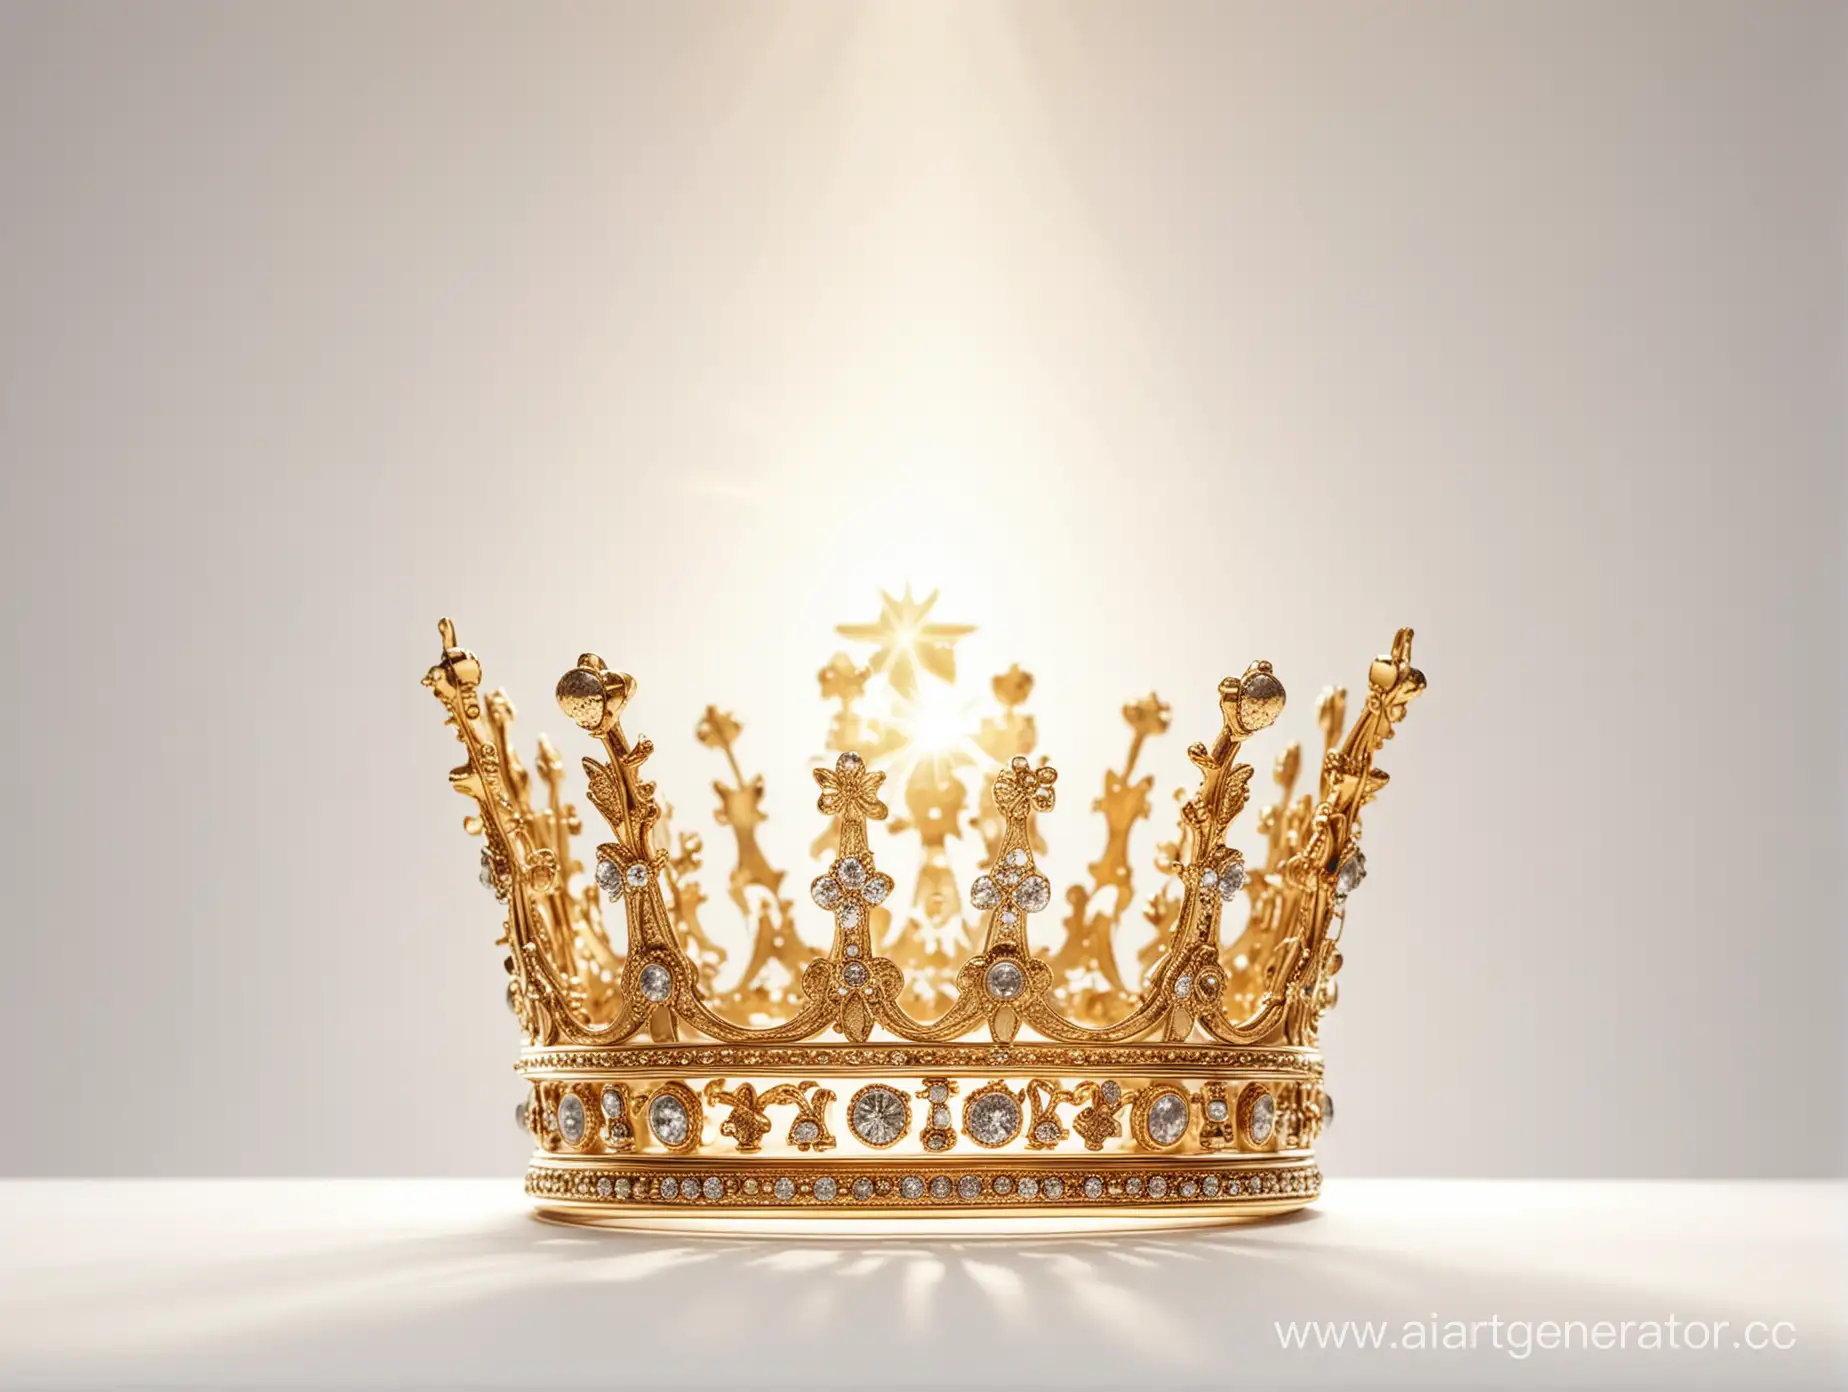 A beautiful golden crown in the foreground. On a white background: heaven, light